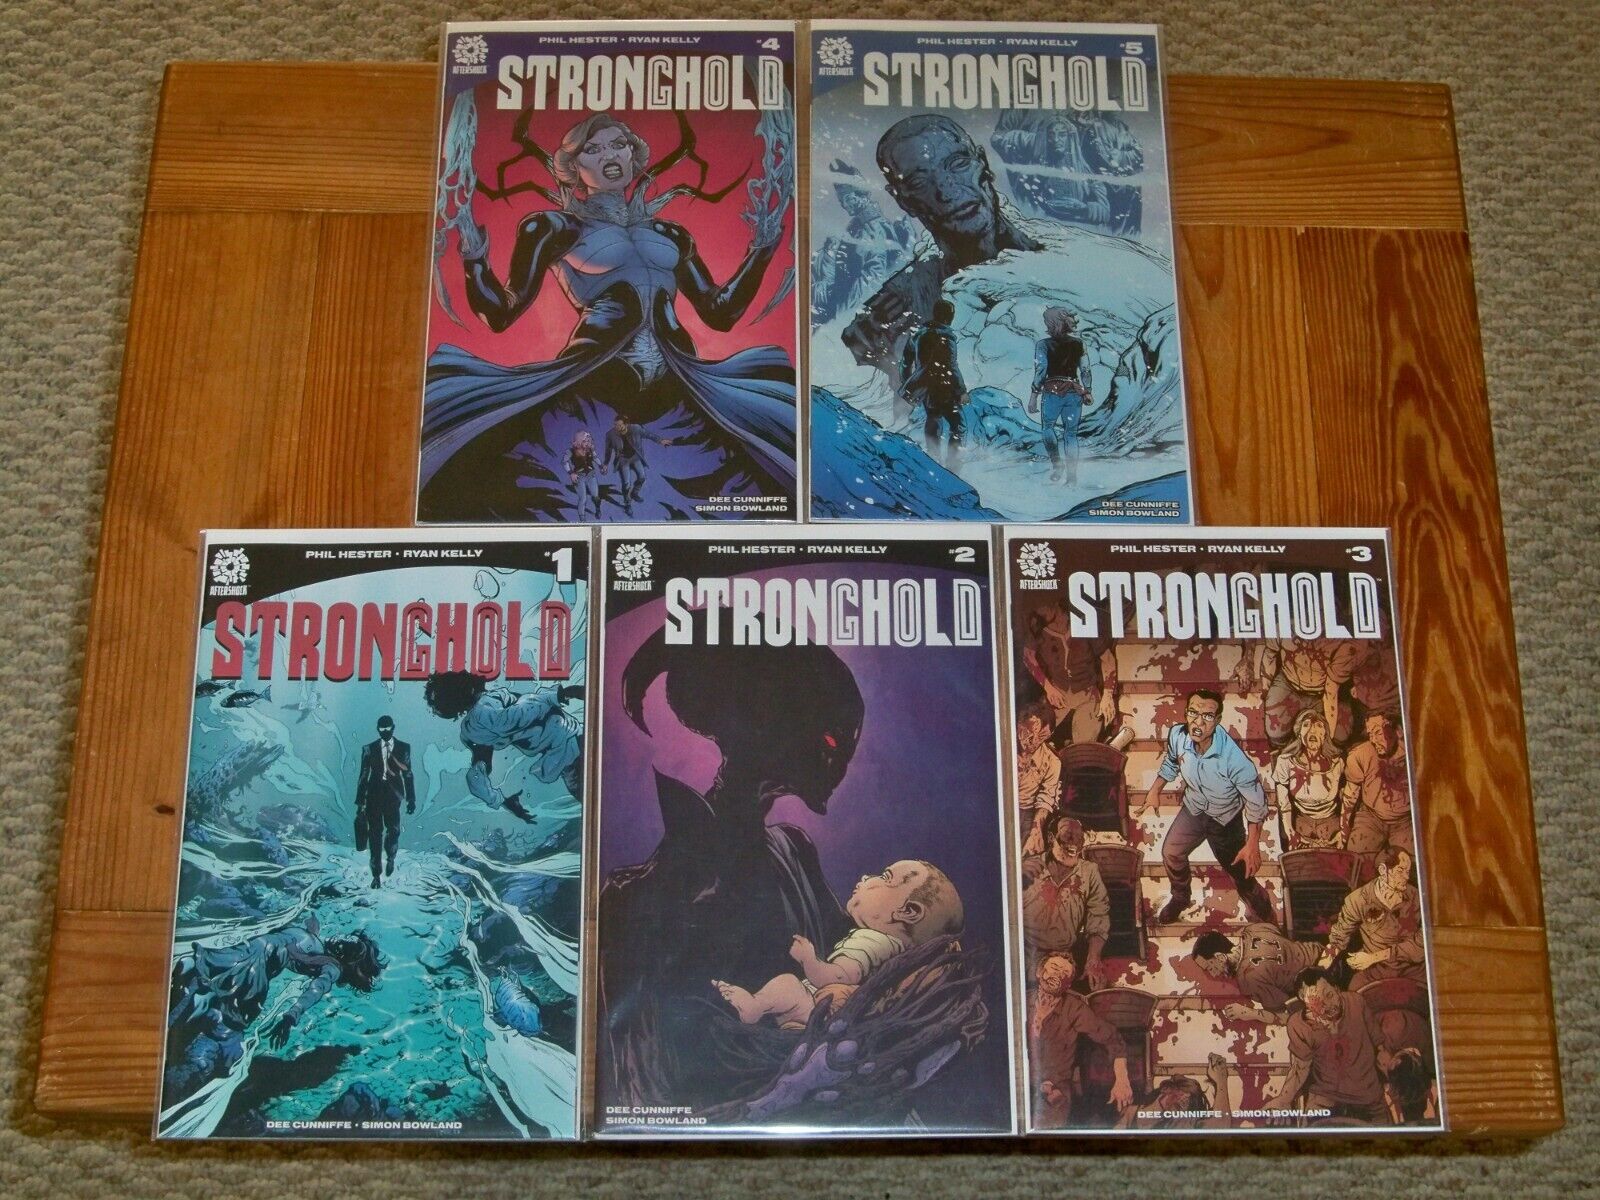 STRONGHOLD -- AfterShock Horror Comics Issues 1-5 -- Complete Series Run